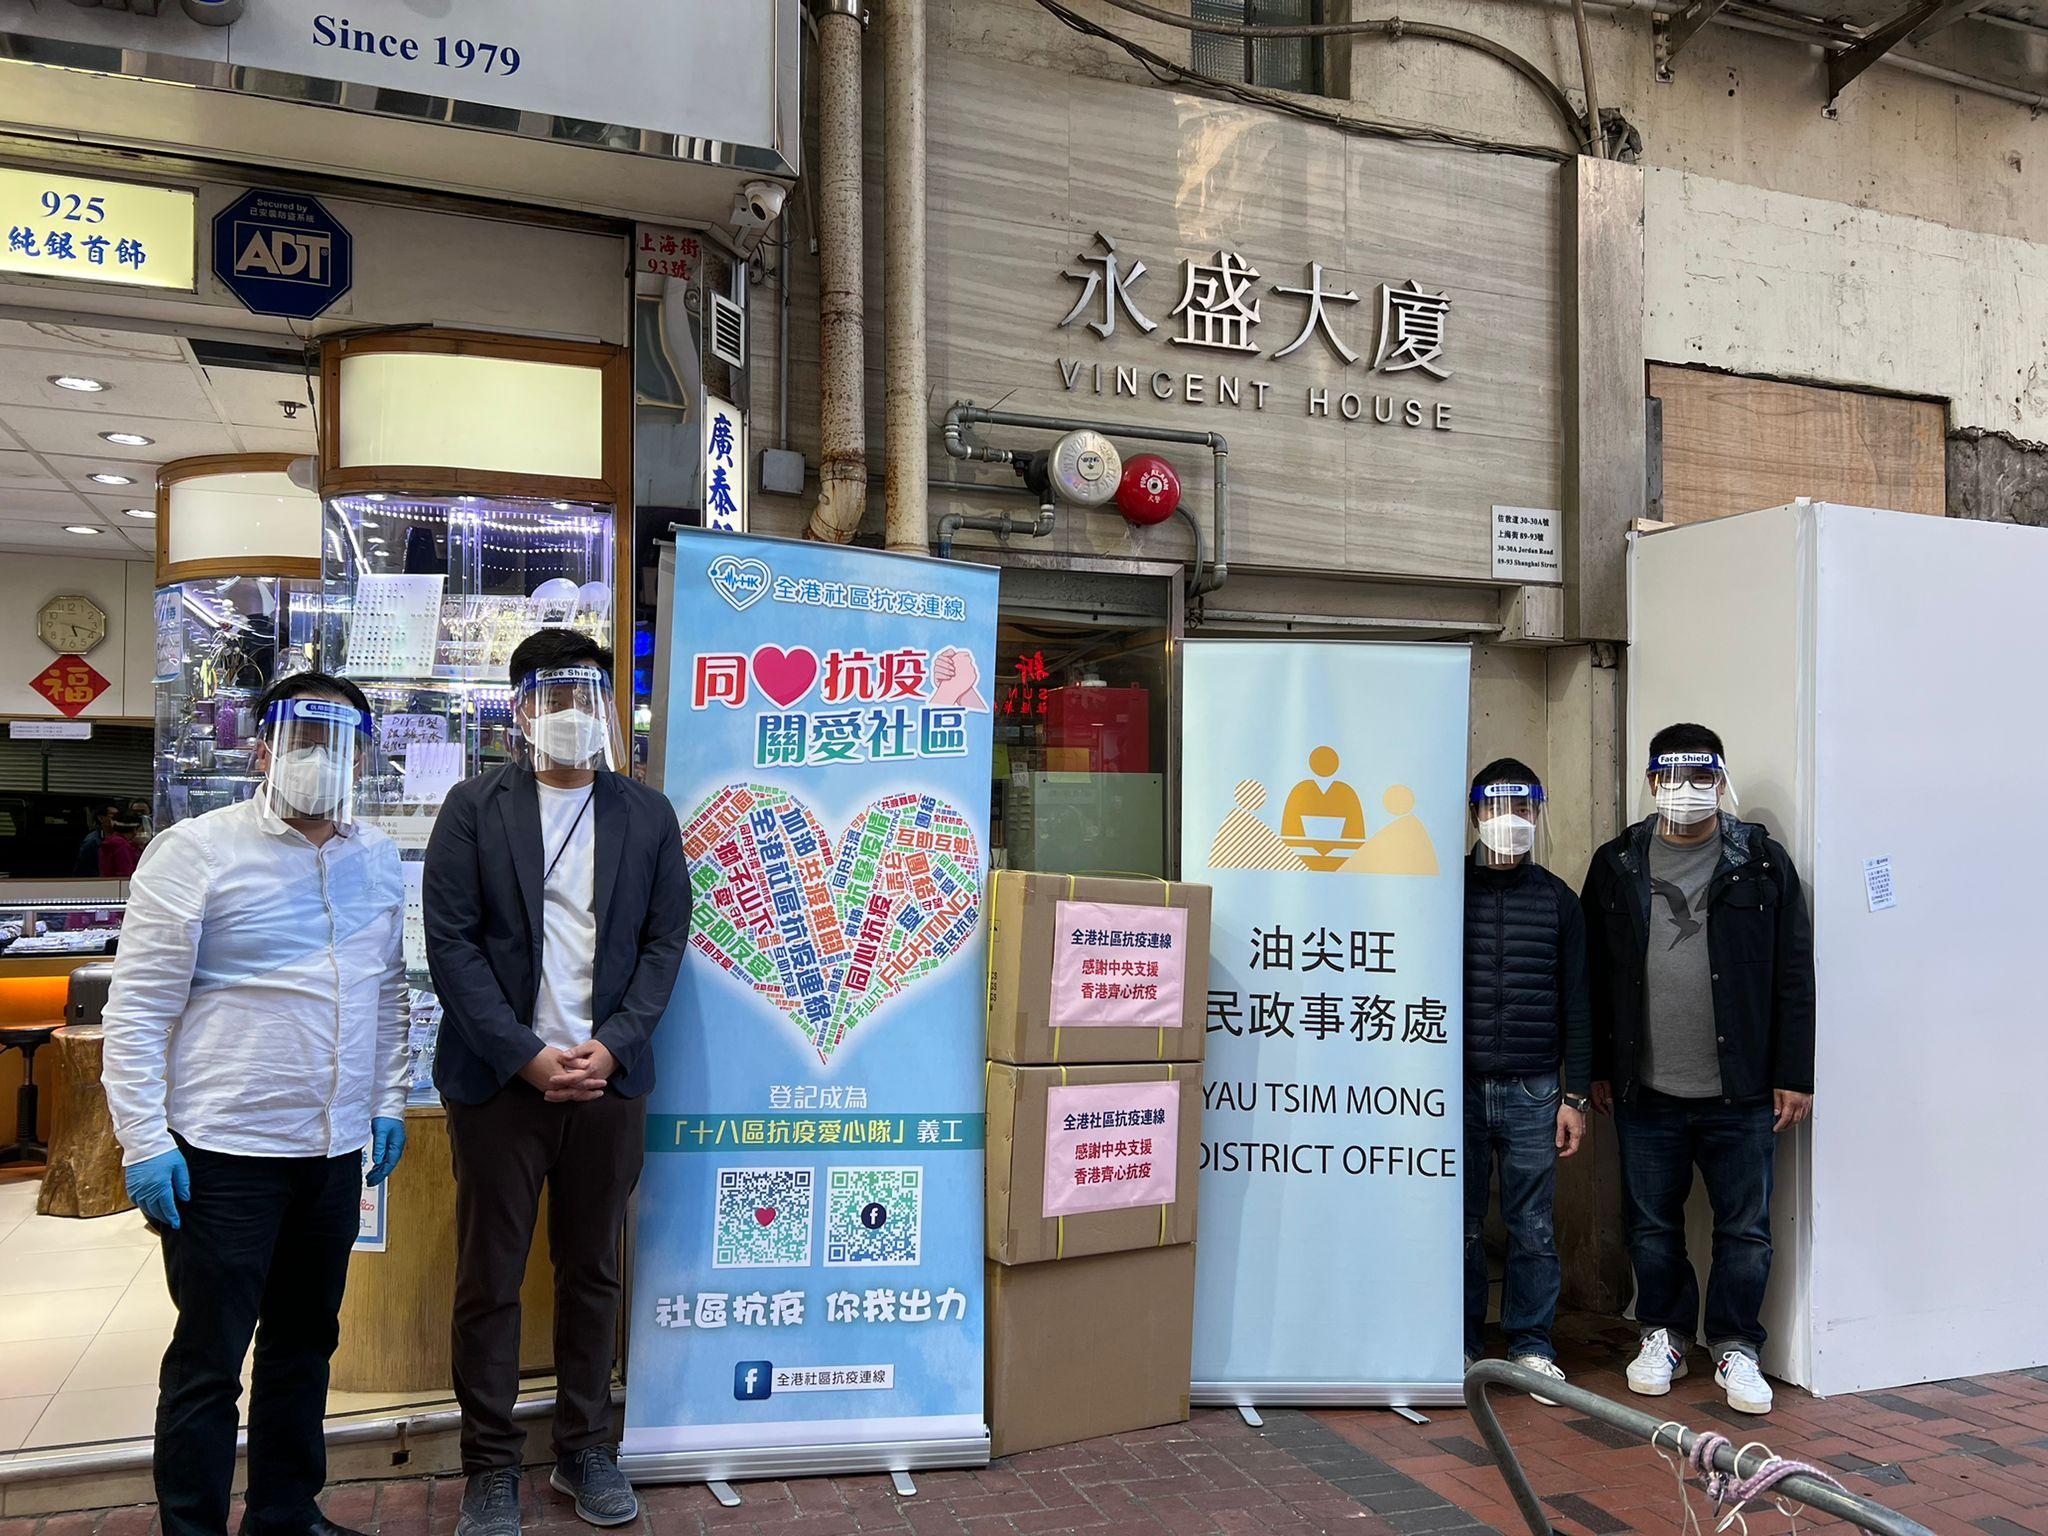 The Yau Tsim Mong District Office, together with the Hong Kong Community Anti-Coronavirus Link, distributed COVID-19 rapid test kits to several residential buildings in Yau Ma Tei, Jordan and Tsim Sha Tsui through the property management companies in the district today (February 28). 
